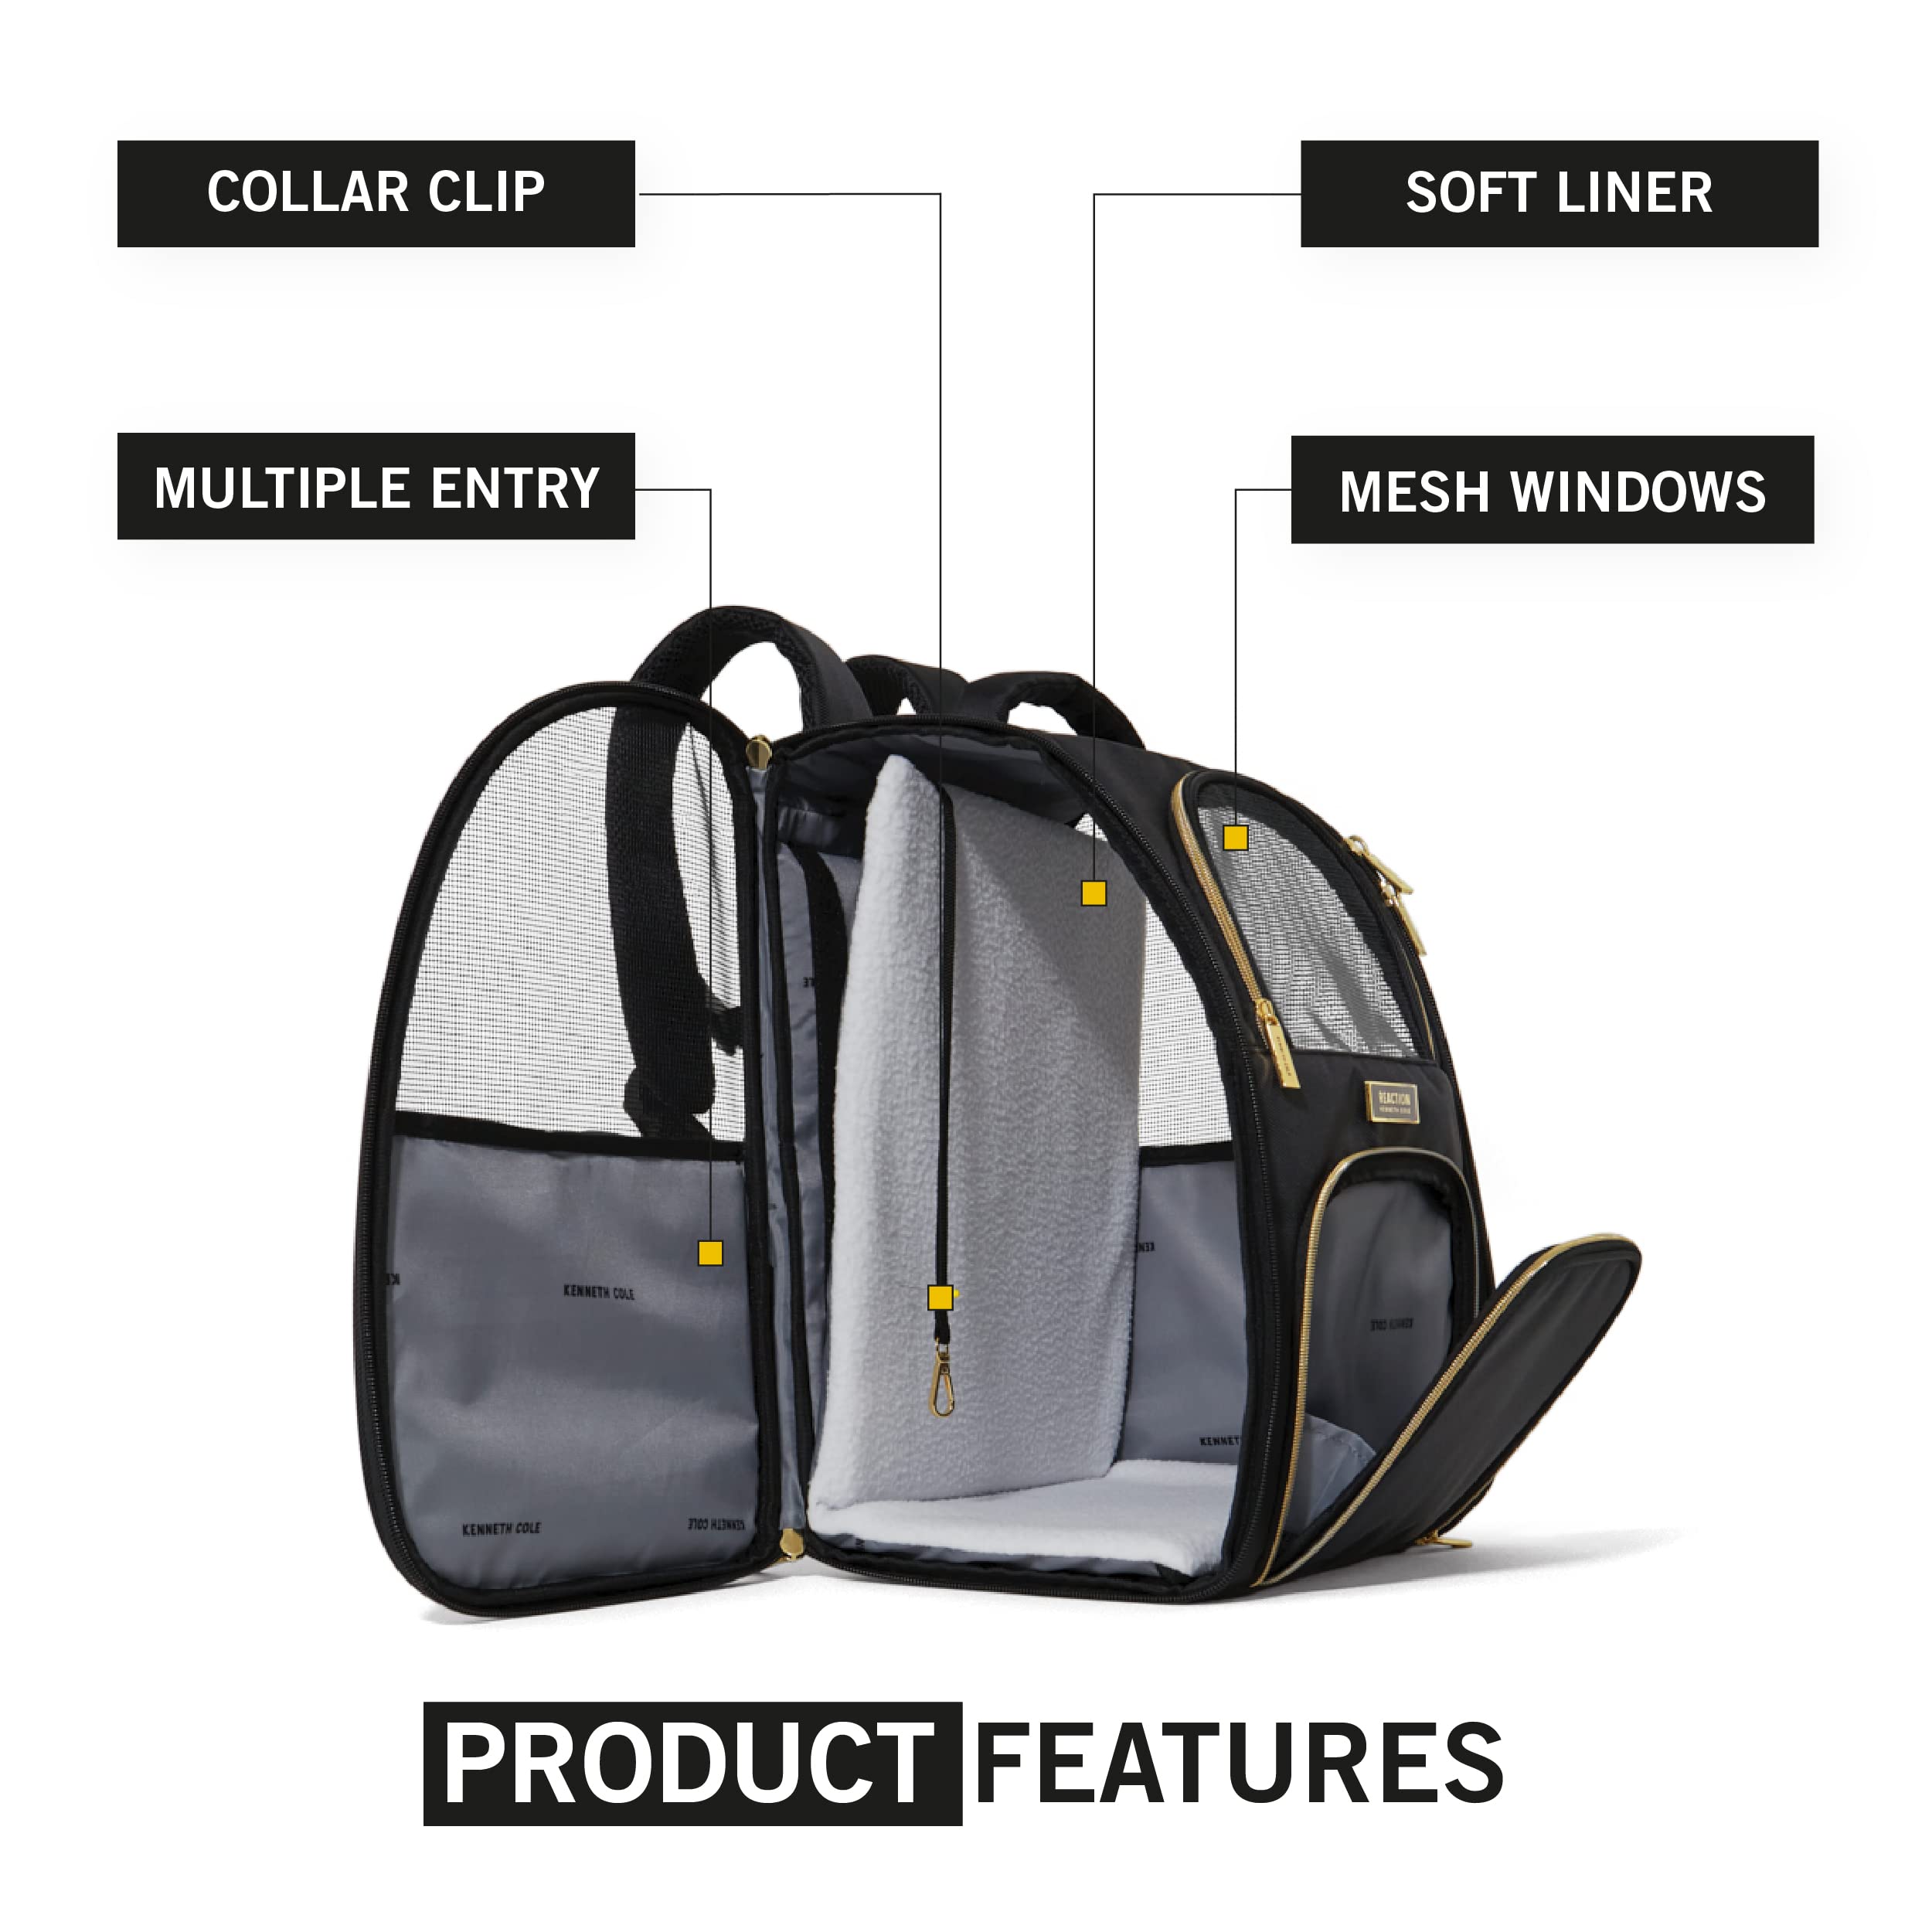 Kenneth Cole Reaction Collapsible Travel Pet Carrier Soft Multi-Entry Folding Portable Kennel Crate for Puppy Dog, Cat, and Rabbit Carrier Bag, Backpack Pet Carrier, Up to 18 Lbs